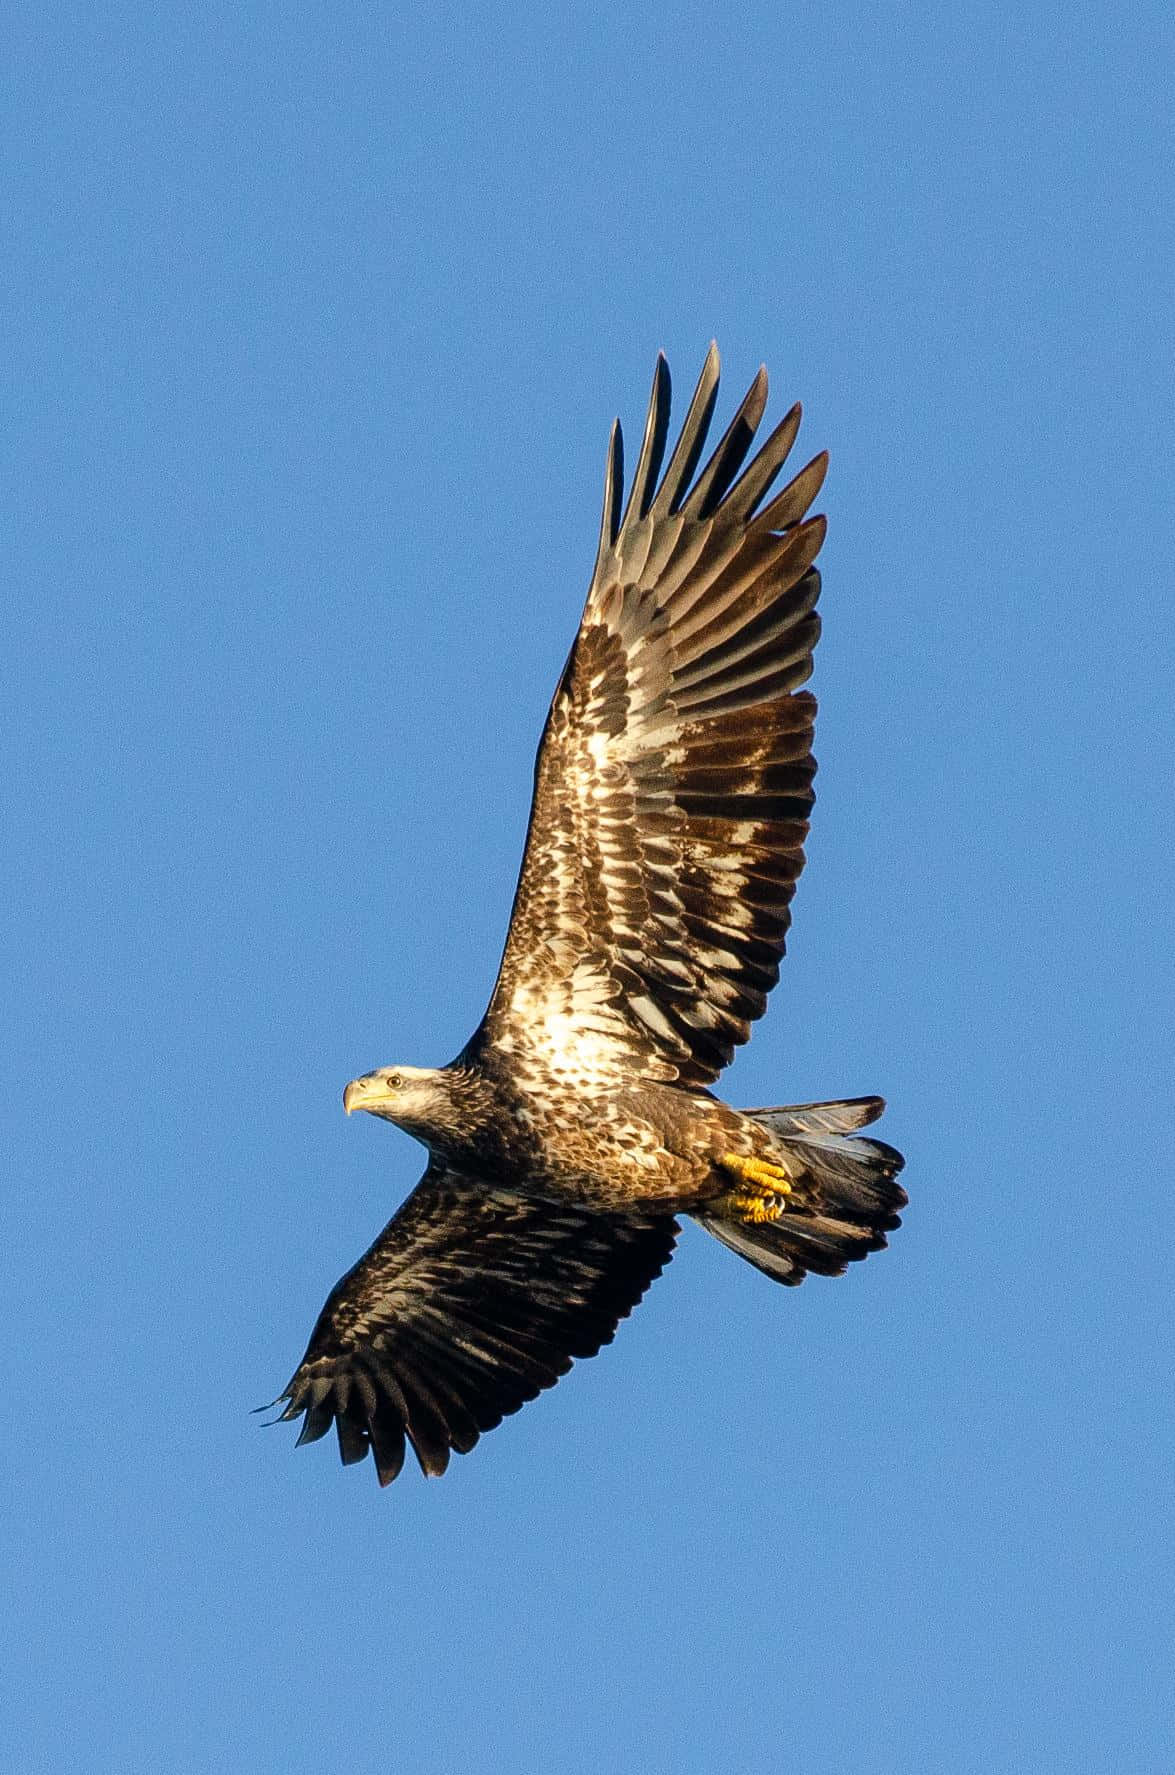 📷  A young bald eagle soaring majestically over a lake in North America